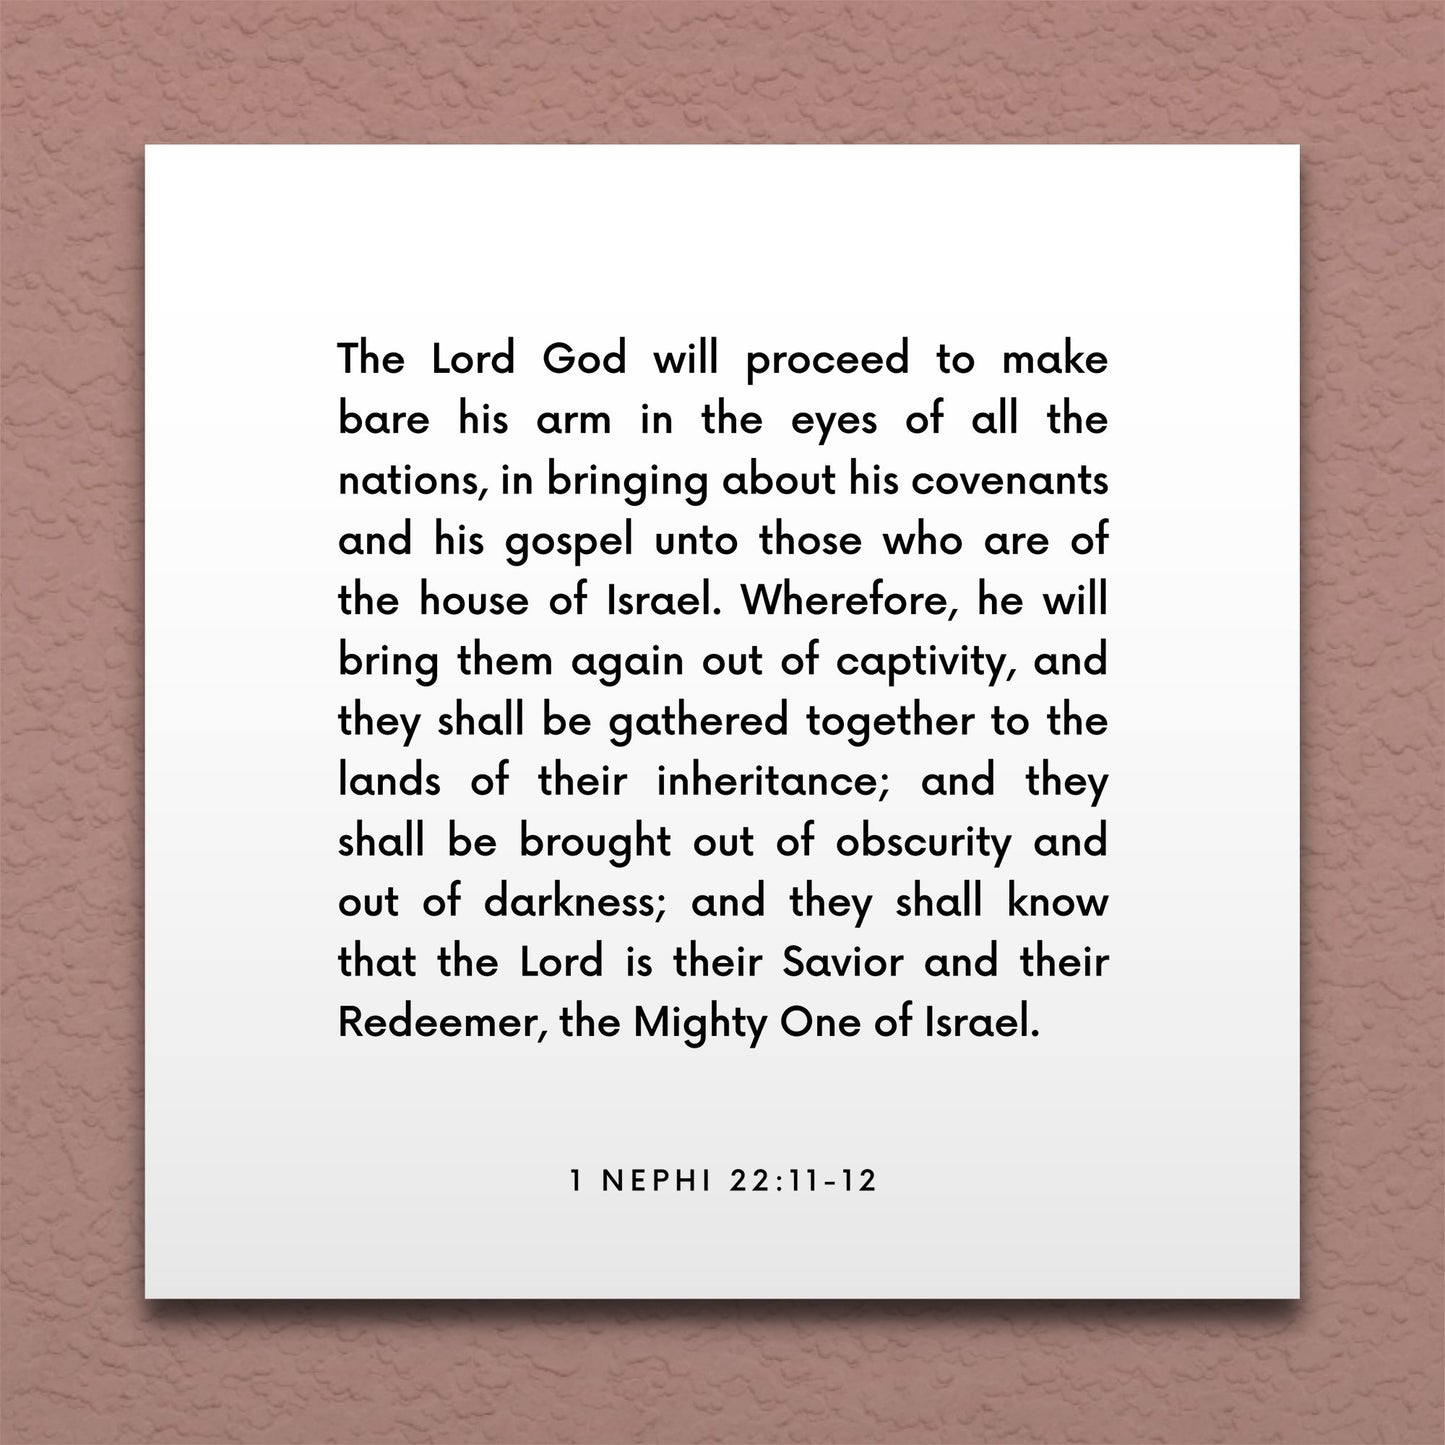 Wall-mounted scripture tile for 1 Nephi 22:11-12 - "They shall know that the Lord is their Savior"